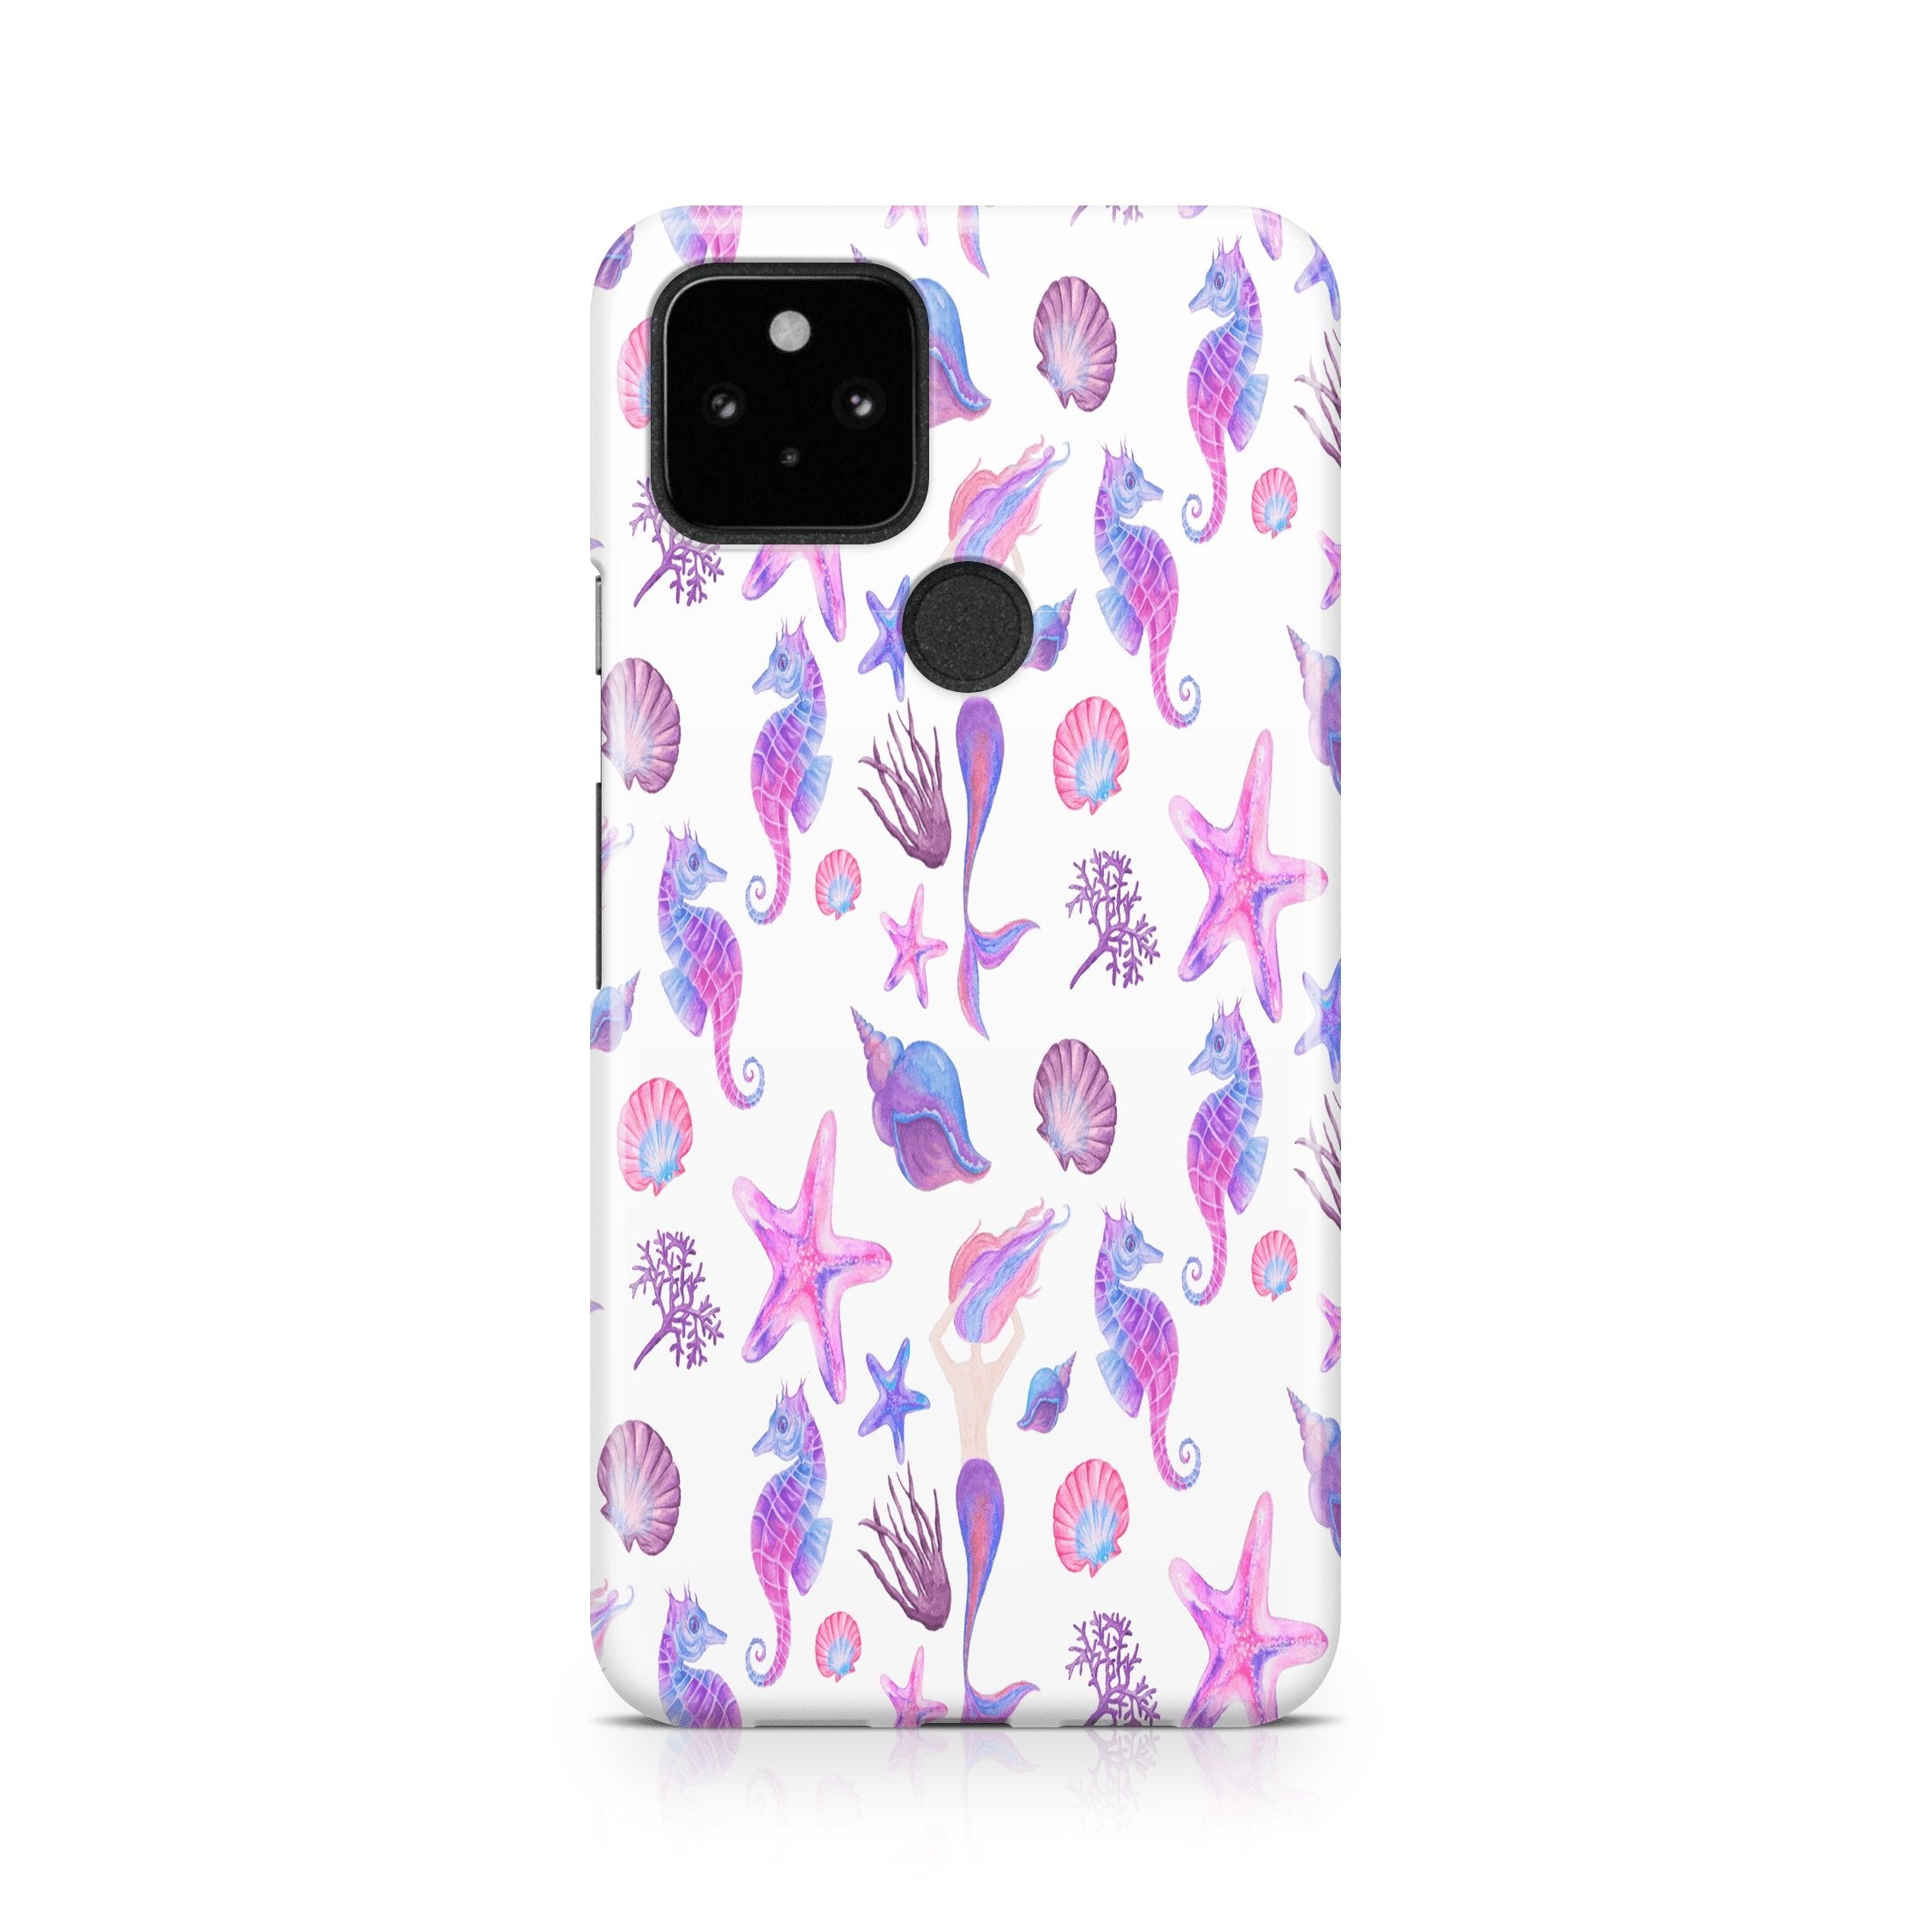 Summer Seaboard - Google phone case designs by CaseSwagger